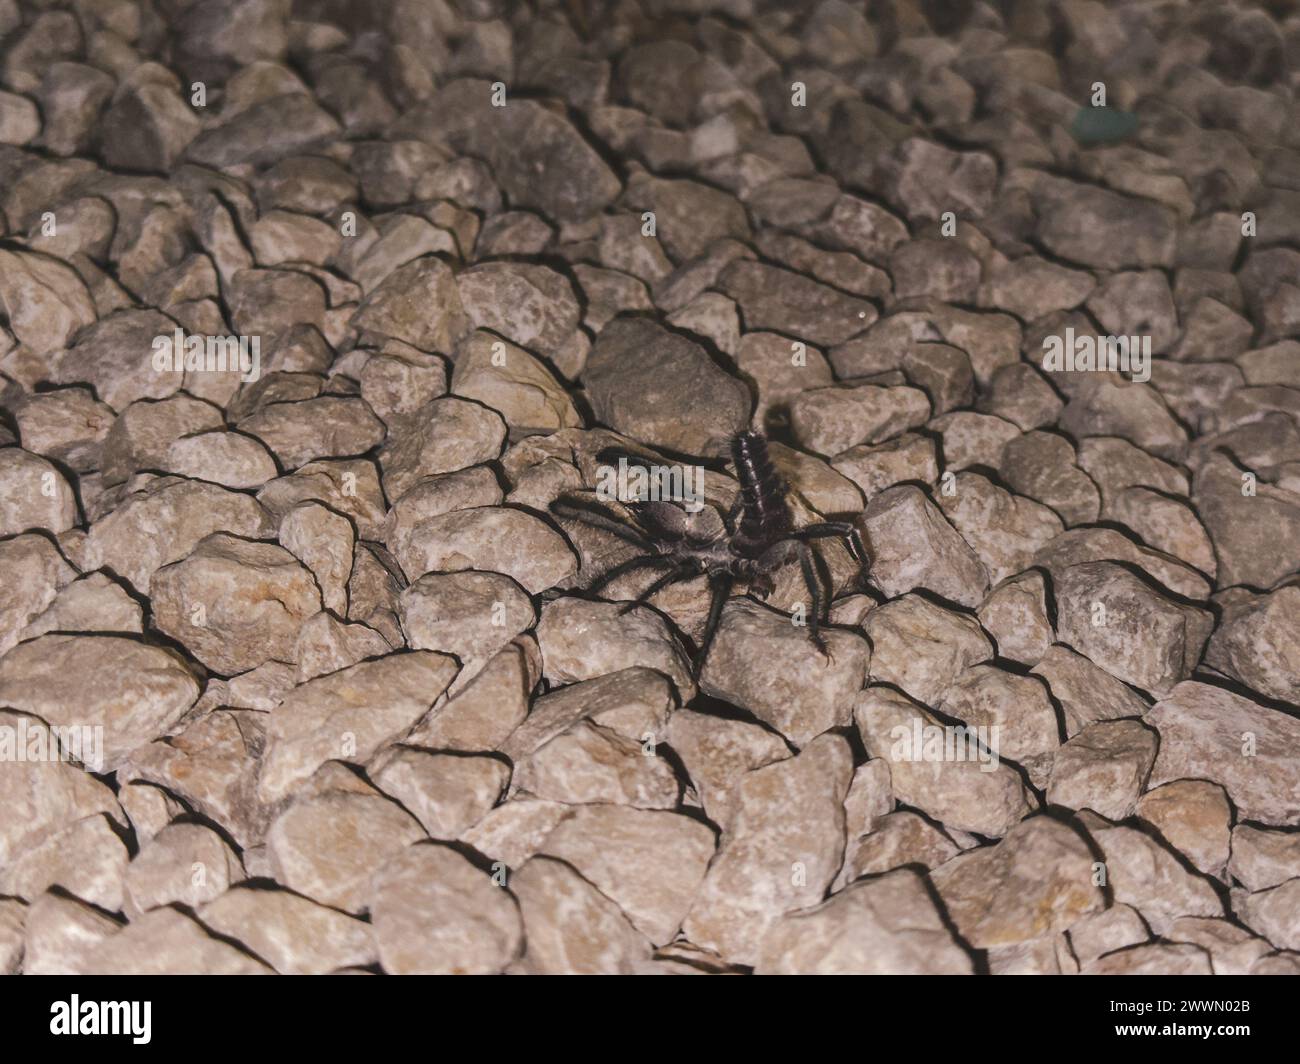 A solitary Camel Spider perched on stones outdoors at night Stock Photo